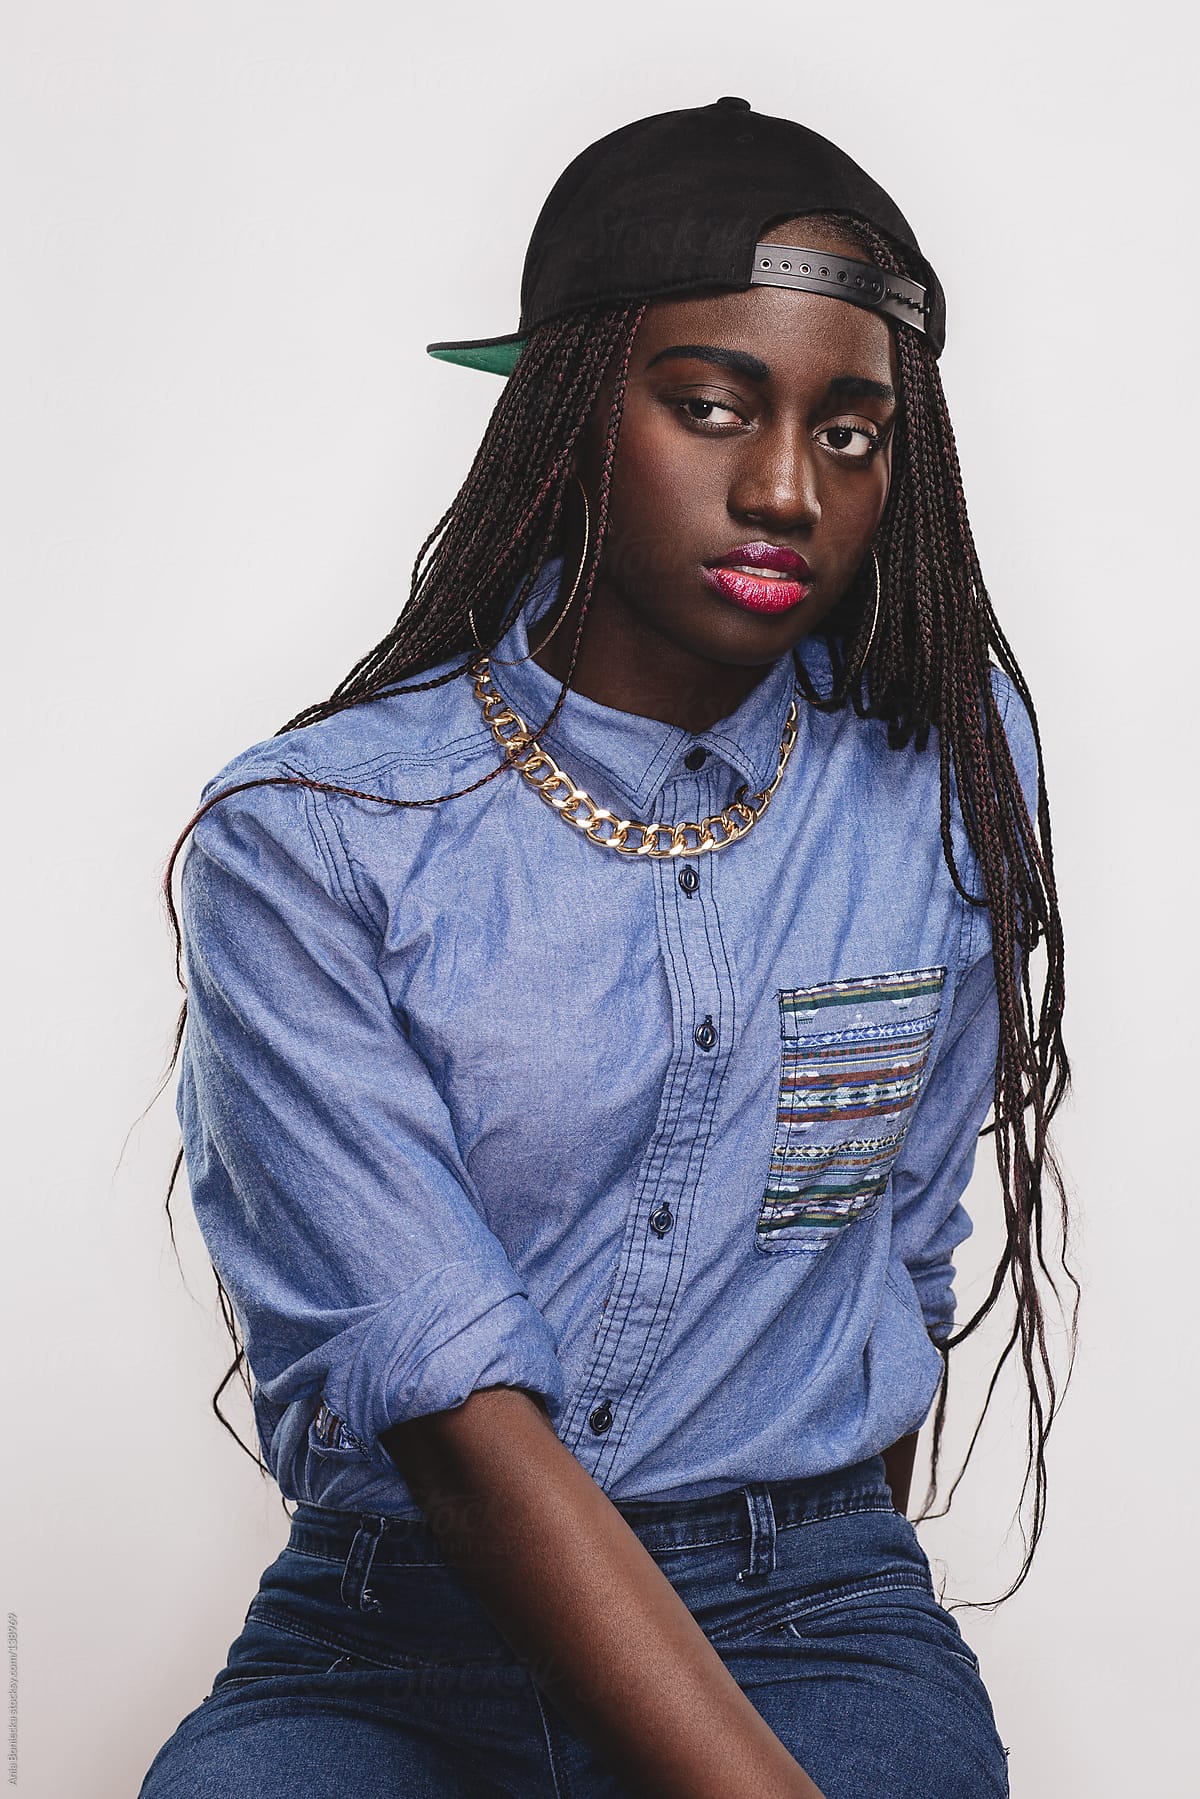 A Pretty Black Girl With Braids And A Backward Baseball Cap By Stocksy Contributor A Model